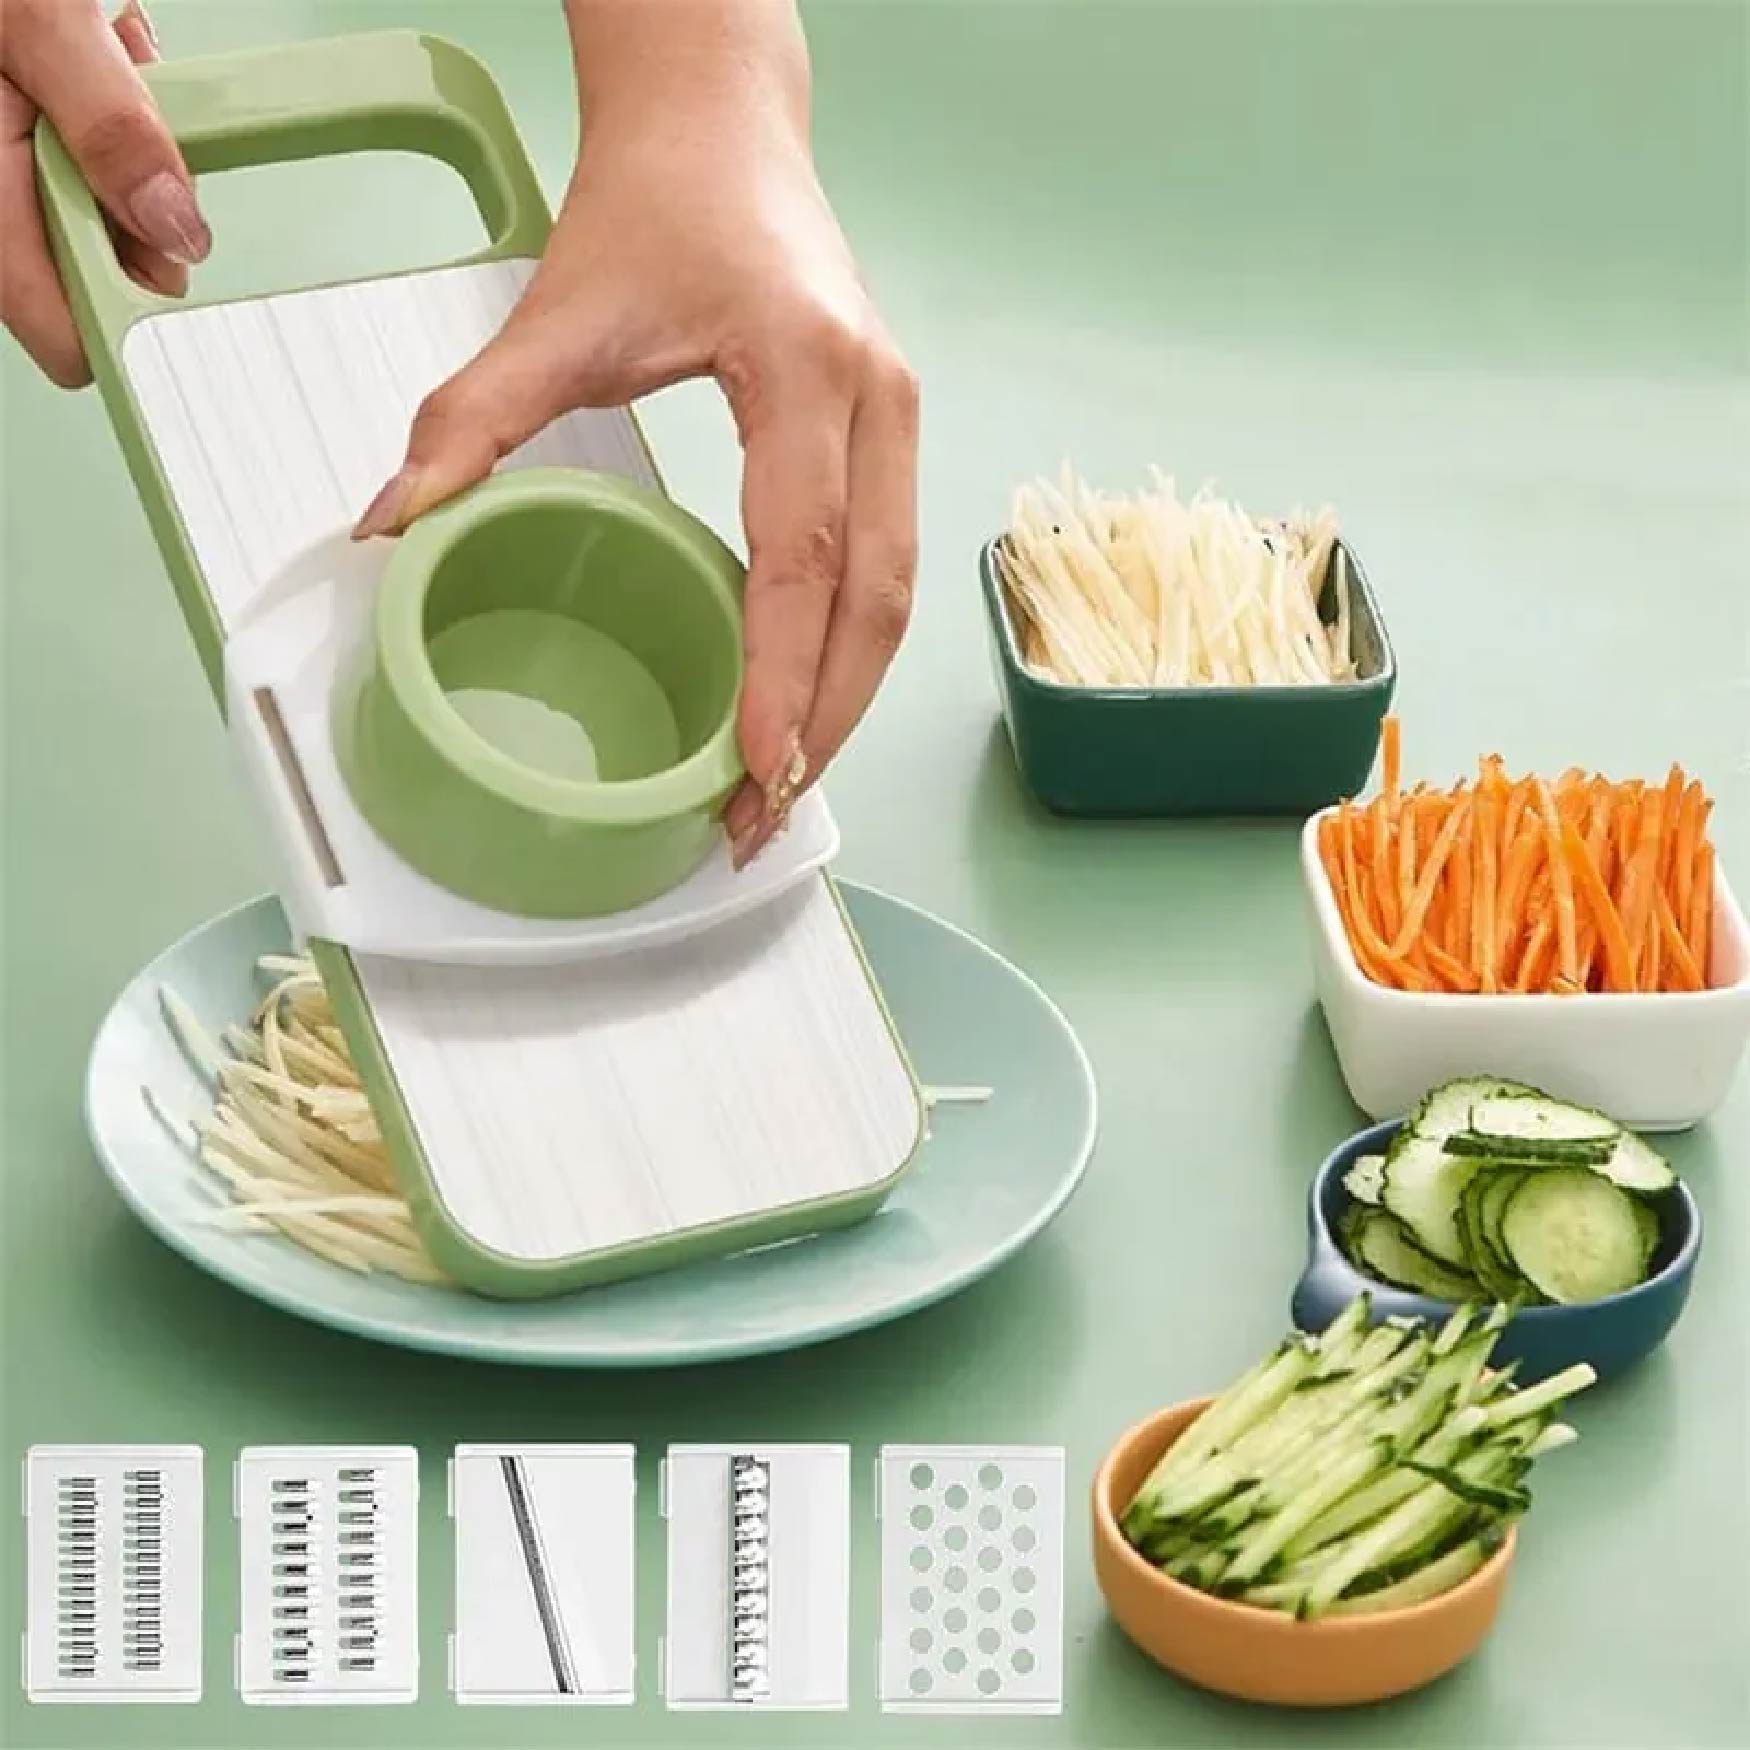 5 in 1 multifunctional vegetable cutter